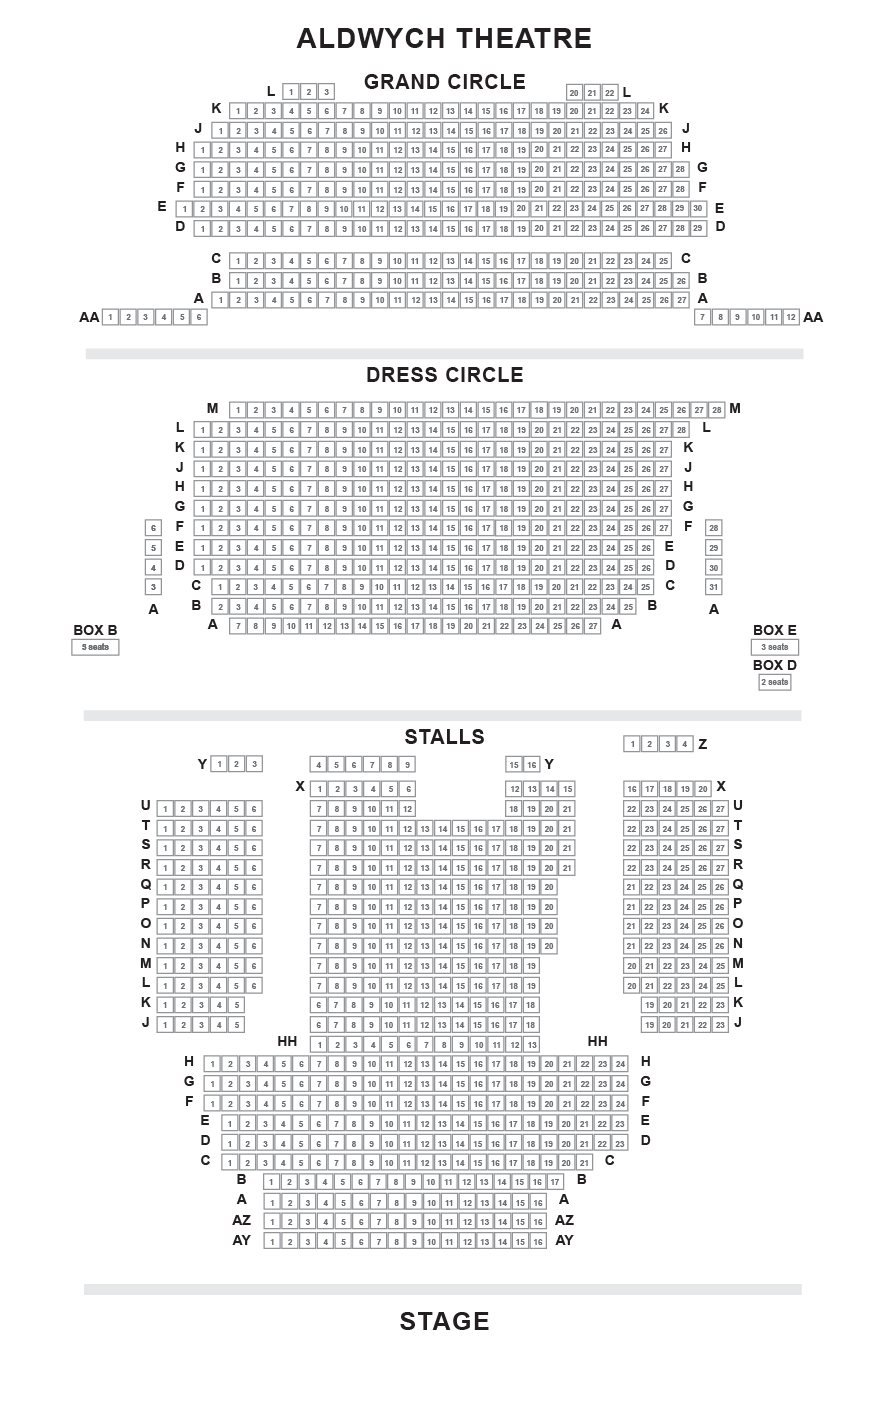 Seating Plan Of The Aldwych Theatre